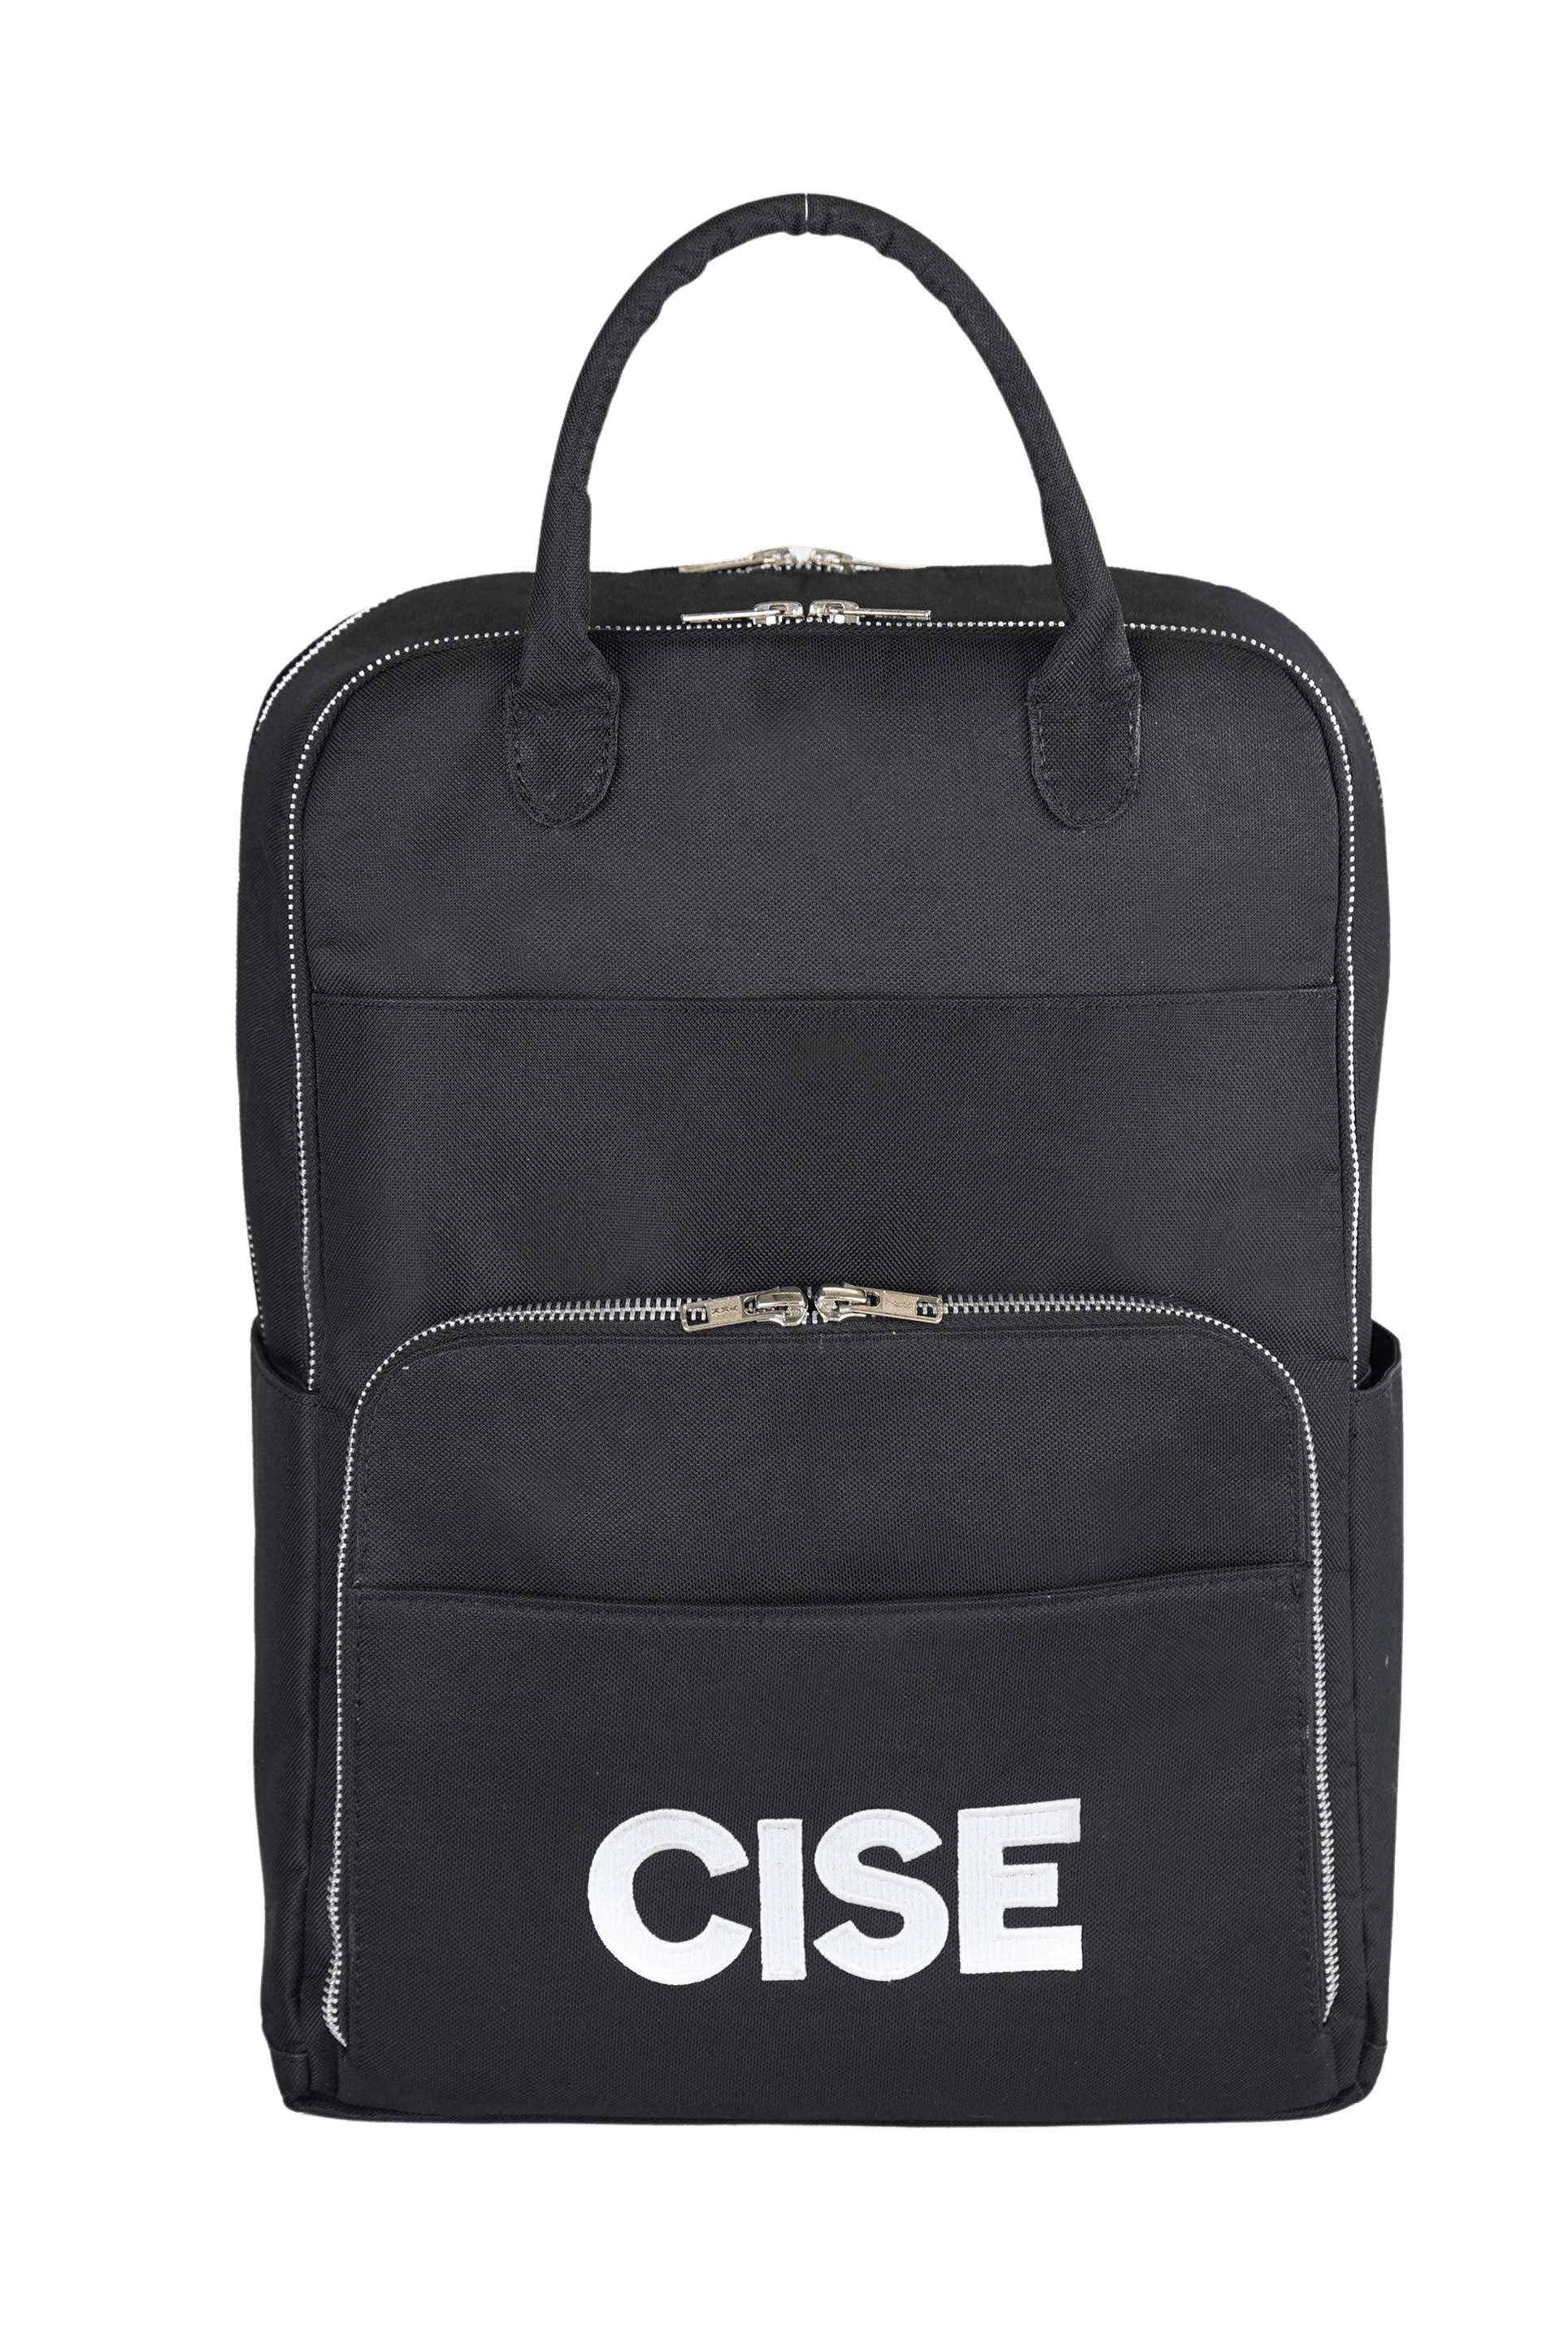 PBW BAGS | Protect Black CISE Bags | Women